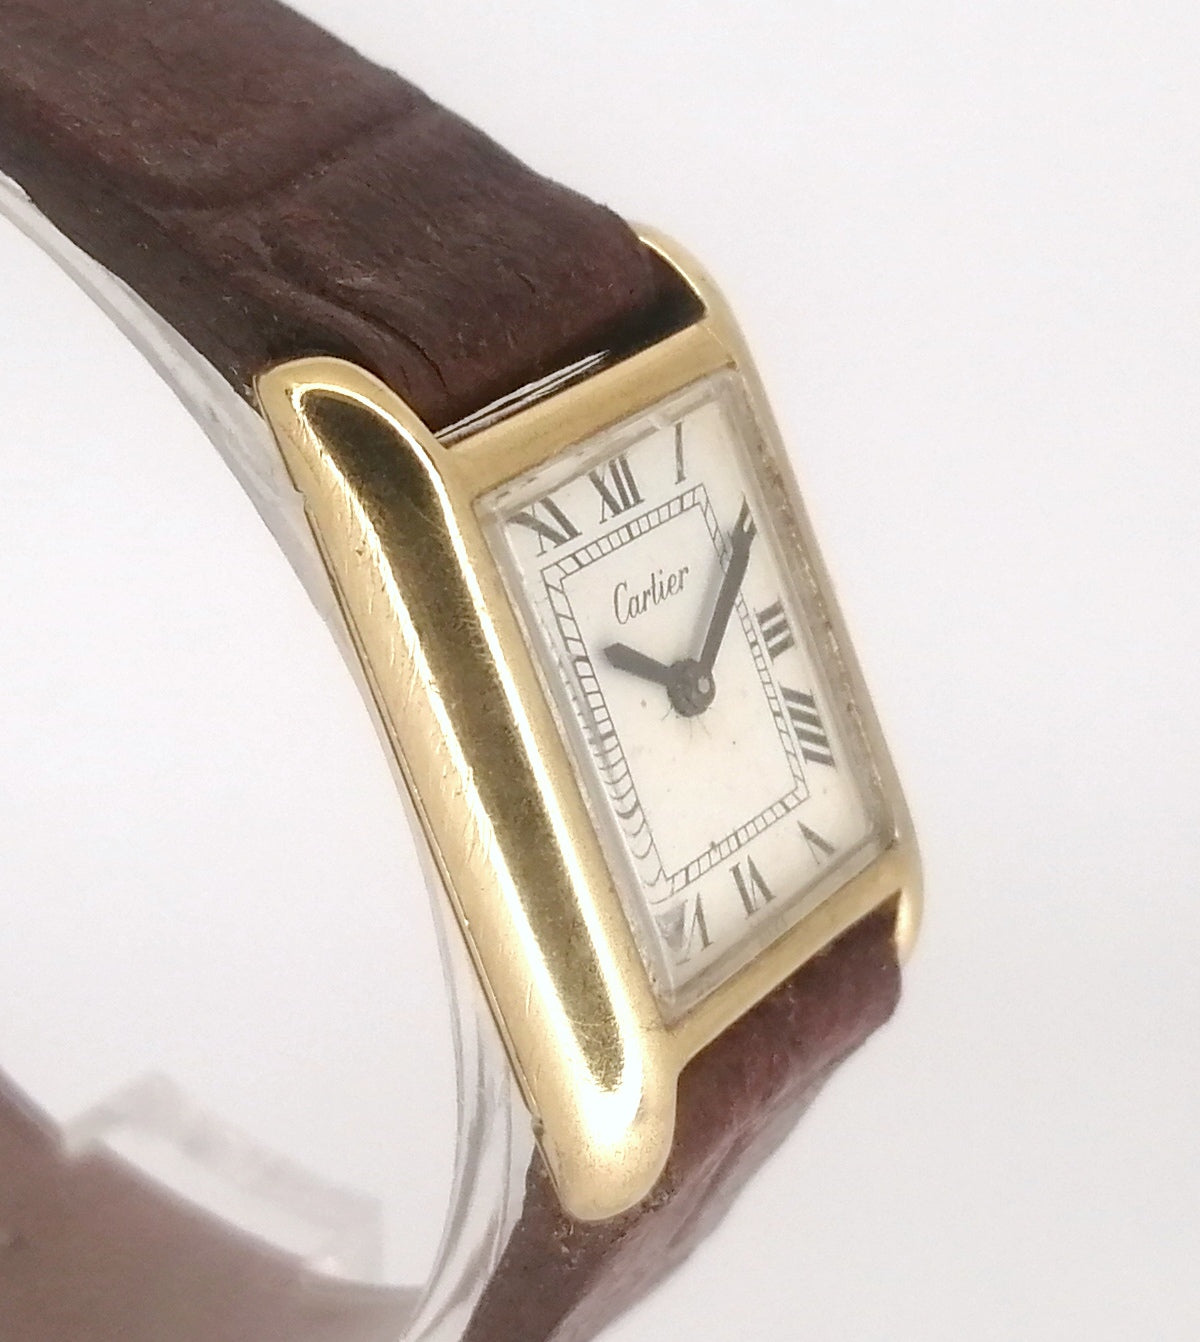 Vintage Cartier Tank 18K electroplated 21x28mm Hand winding Serviced